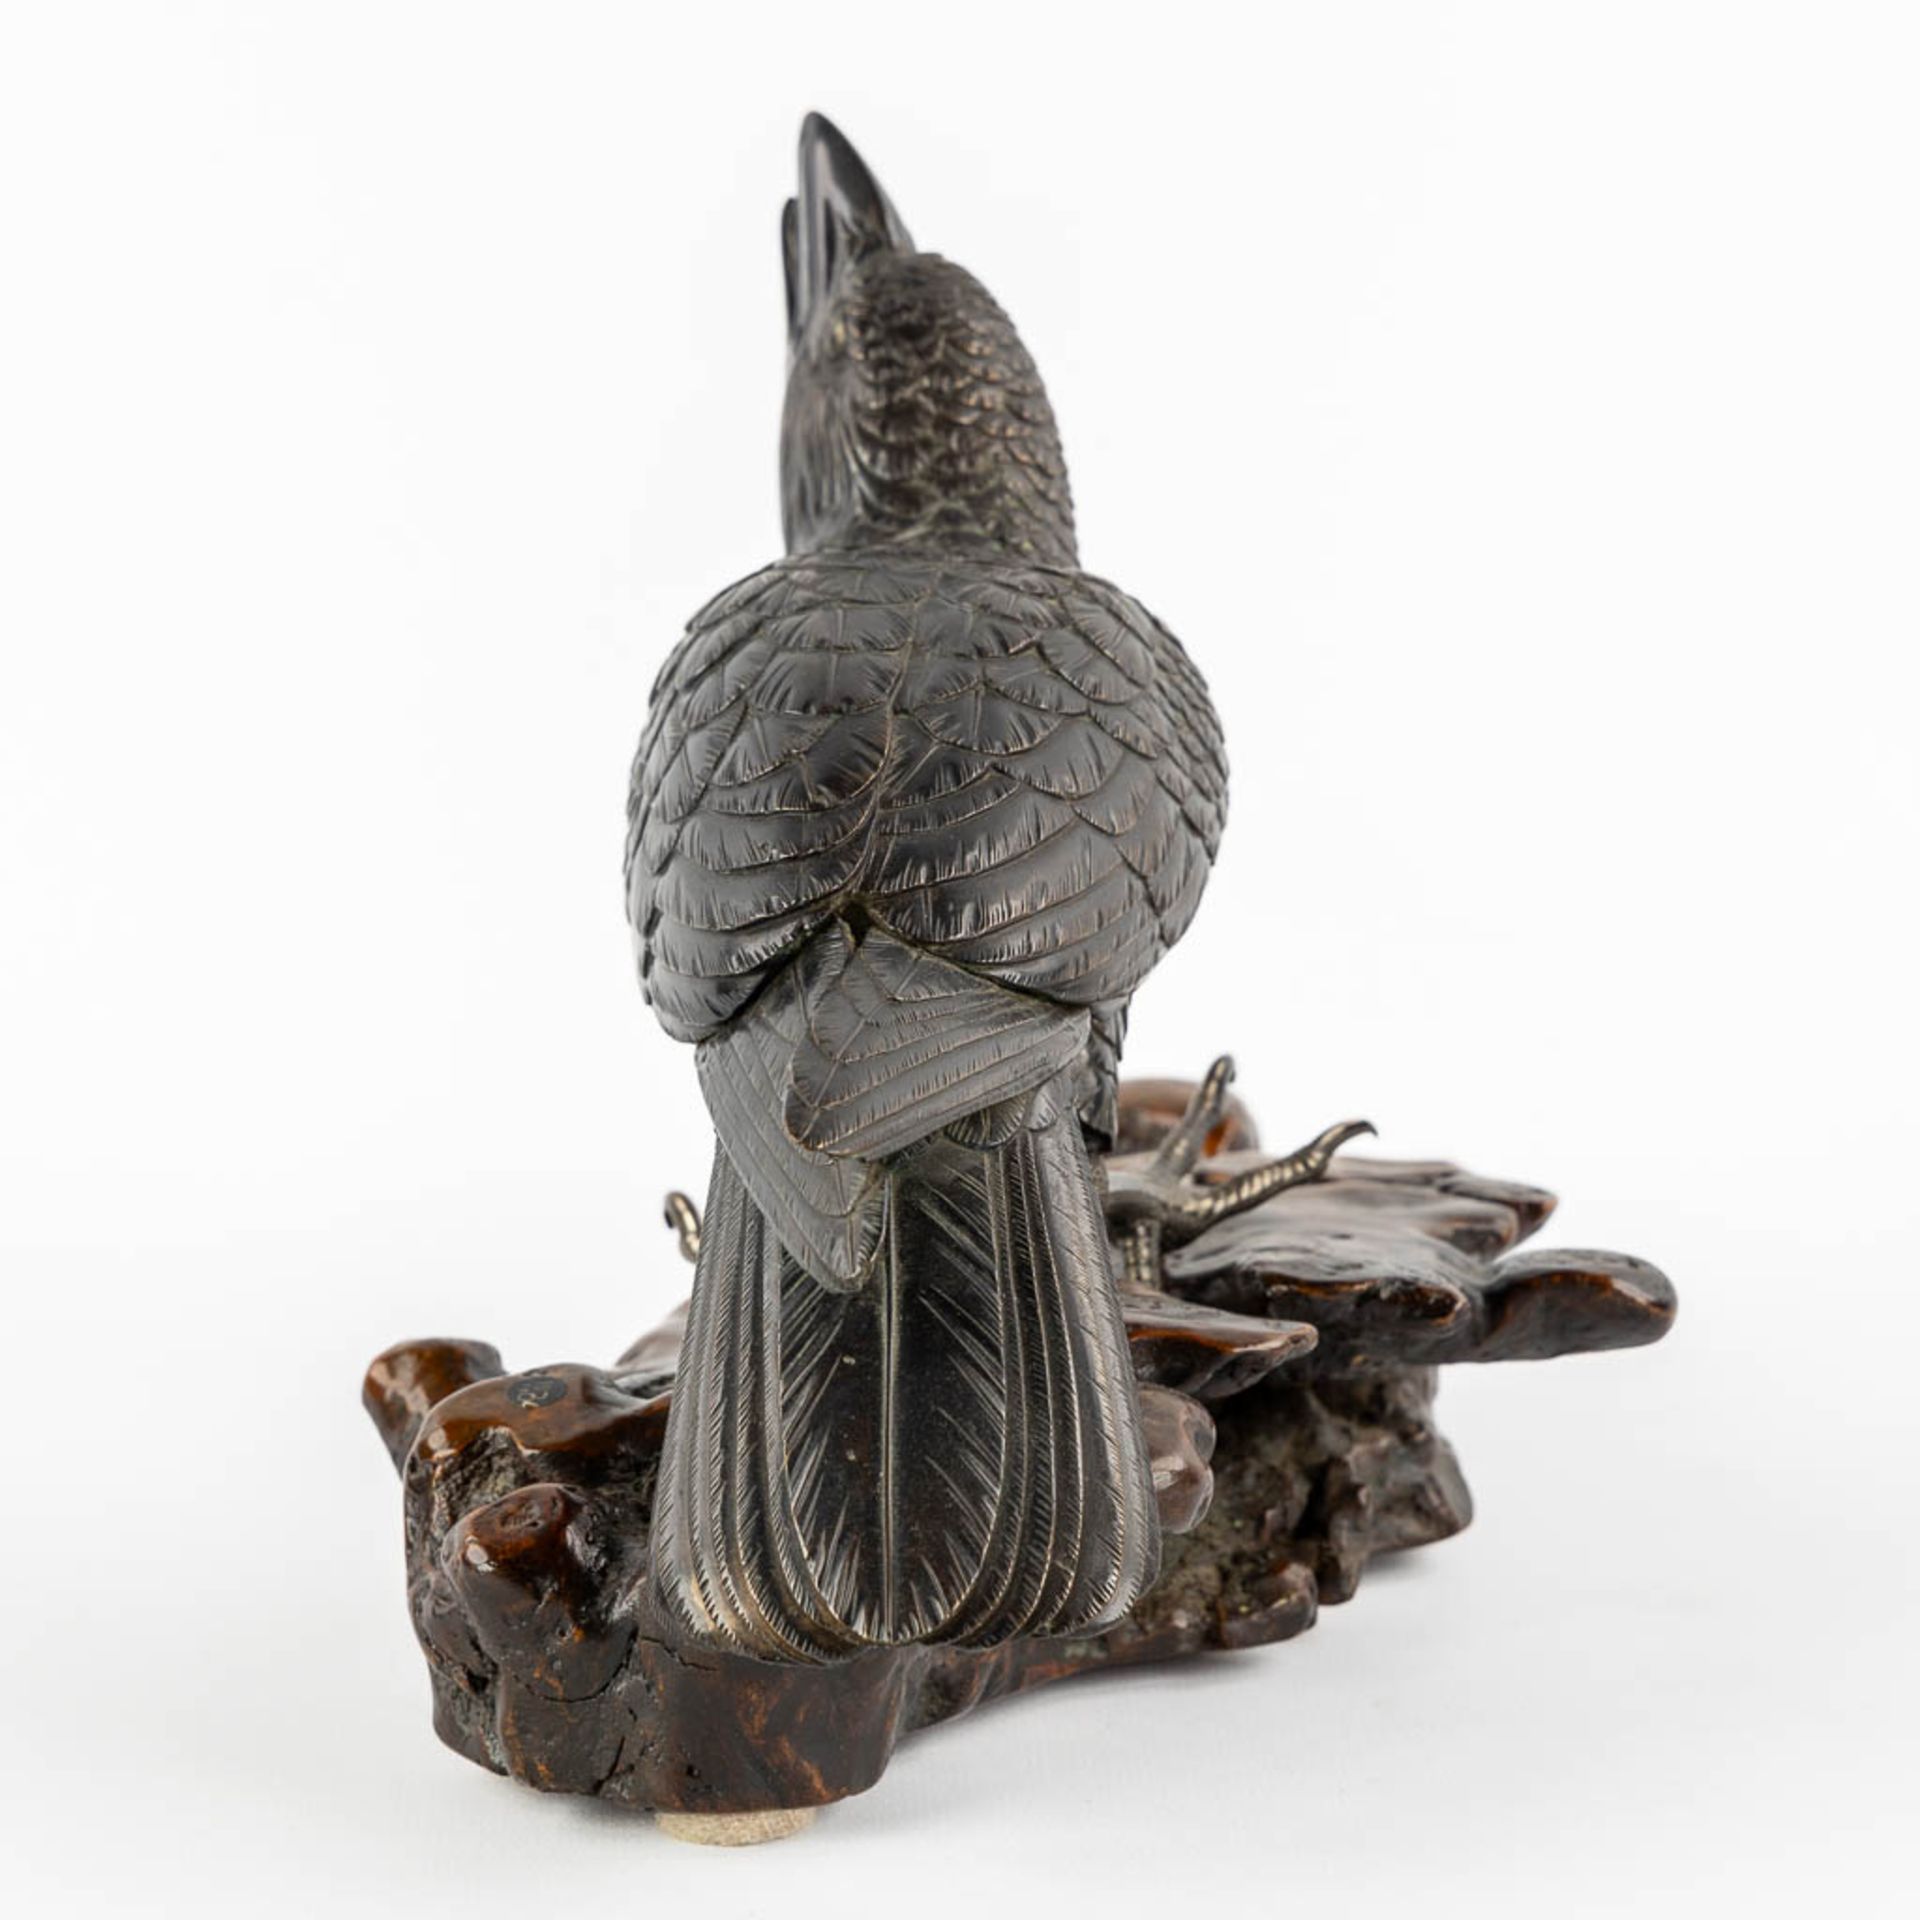 A Raven, patinated bronze mounted on a wood base. Probably Japan. (L:17 x W:30 x H:17 cm) - Image 4 of 10